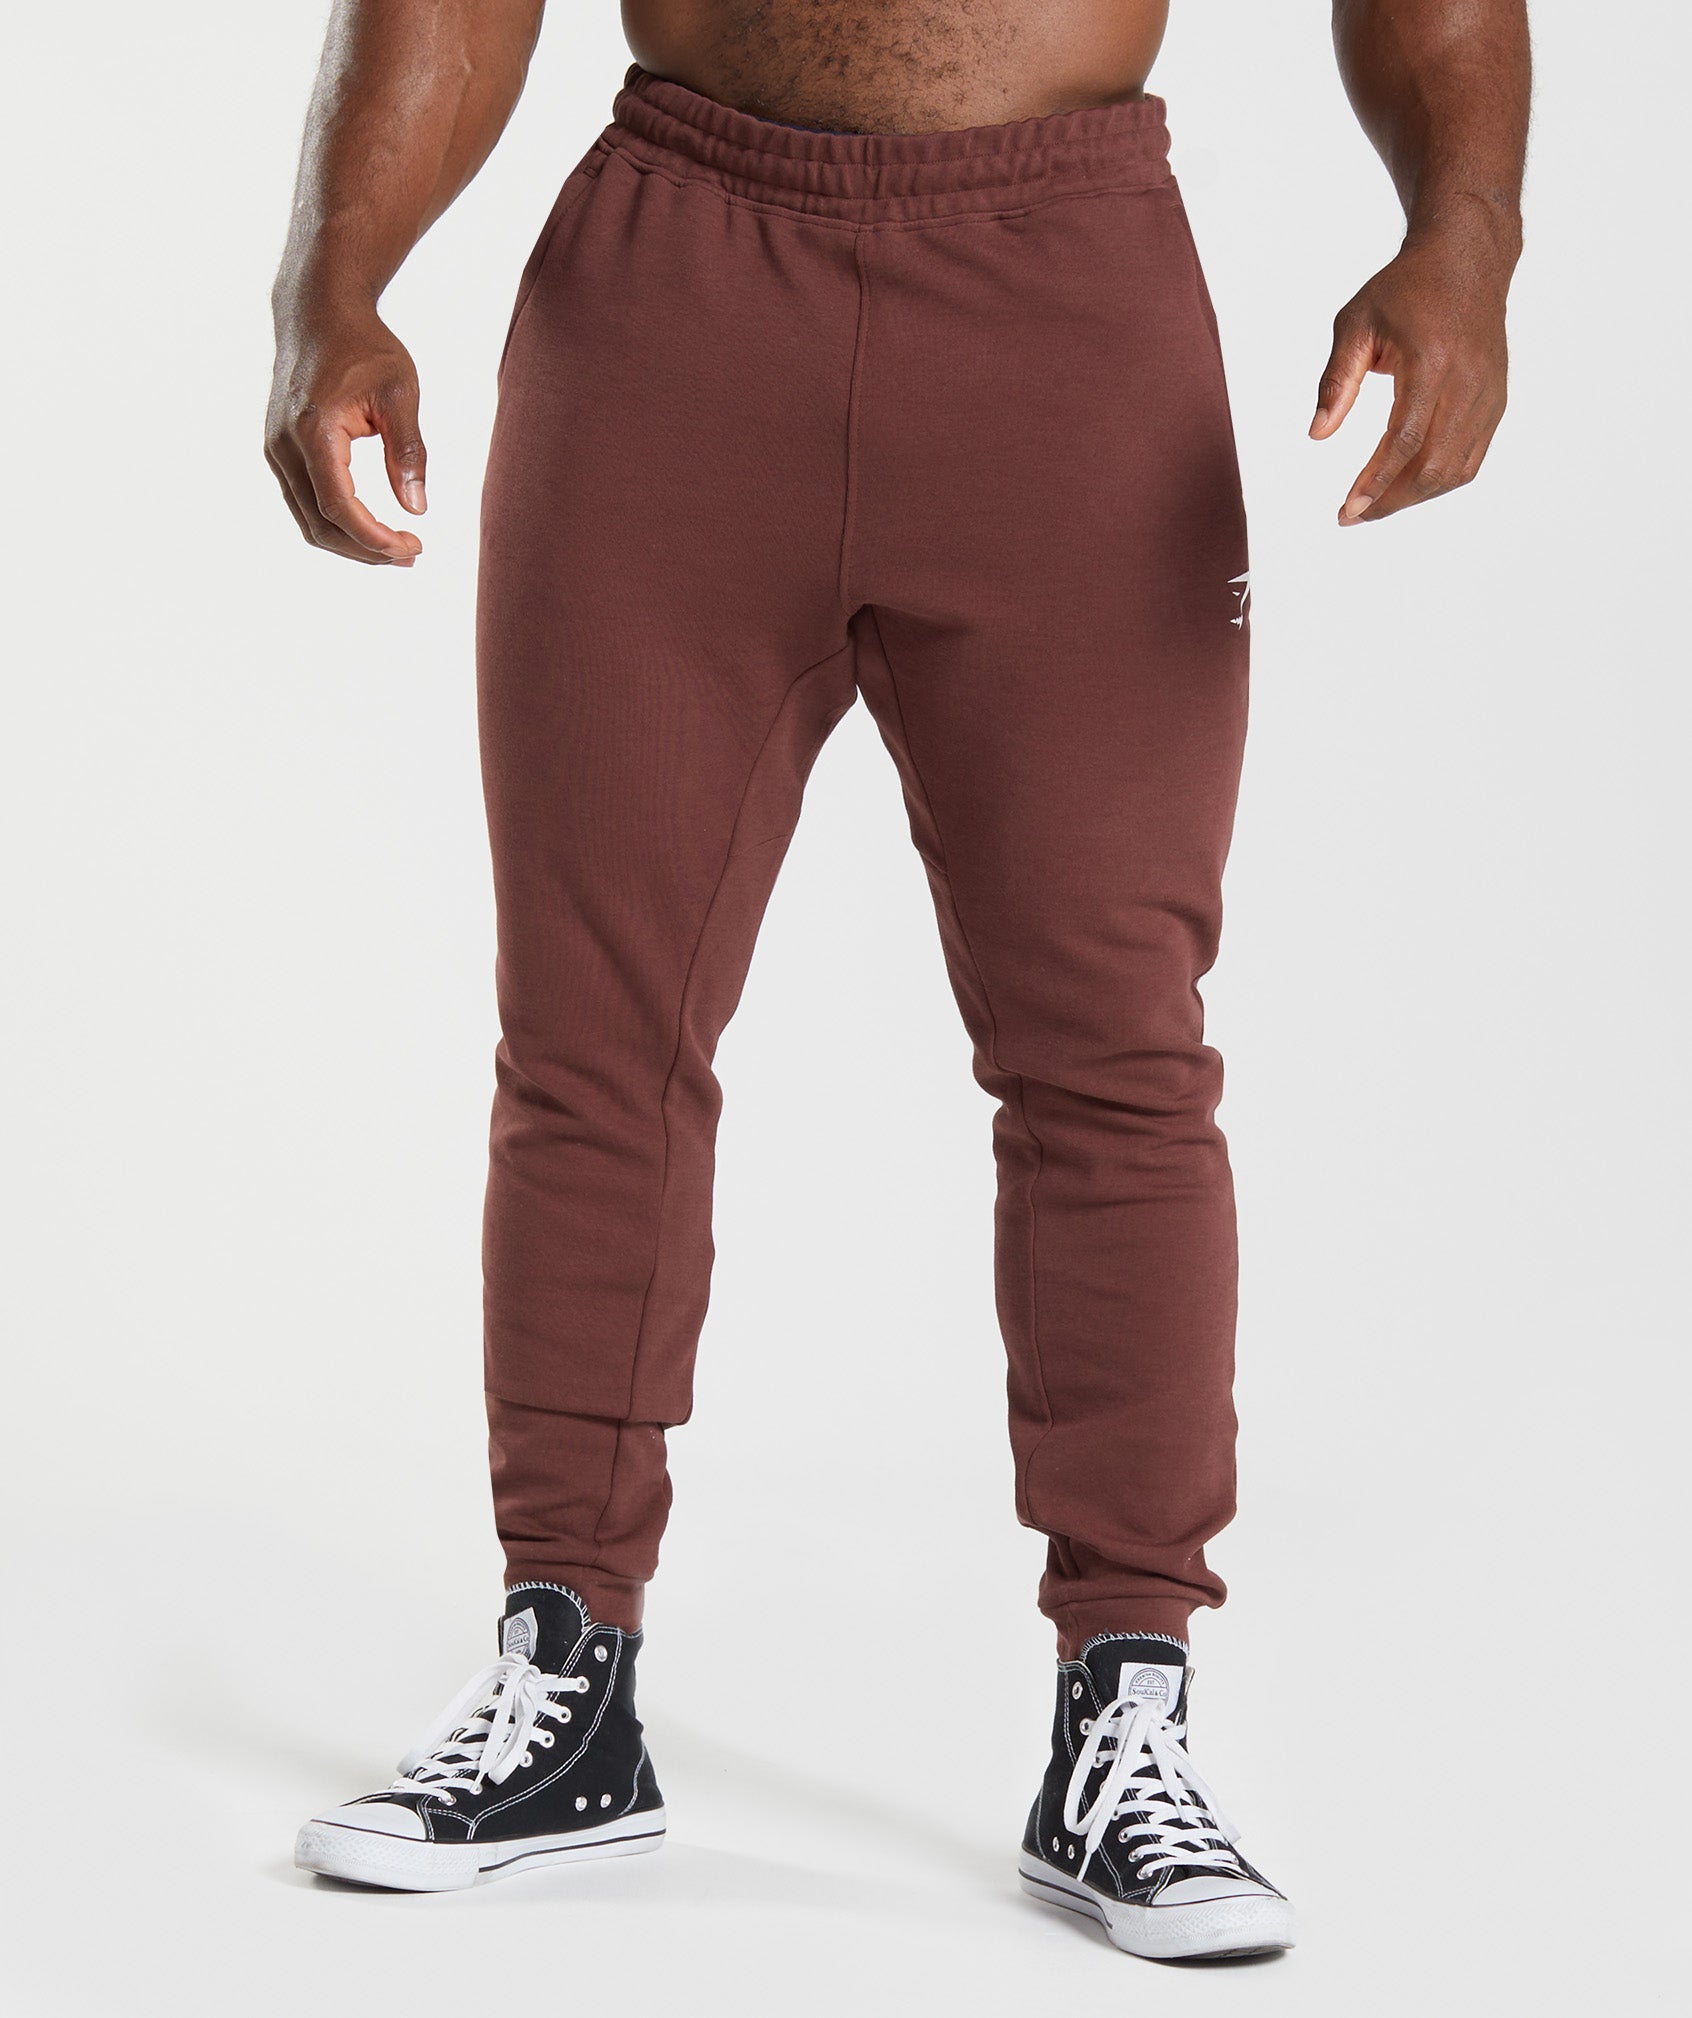 React Joggers in Cherry Brown - view 1